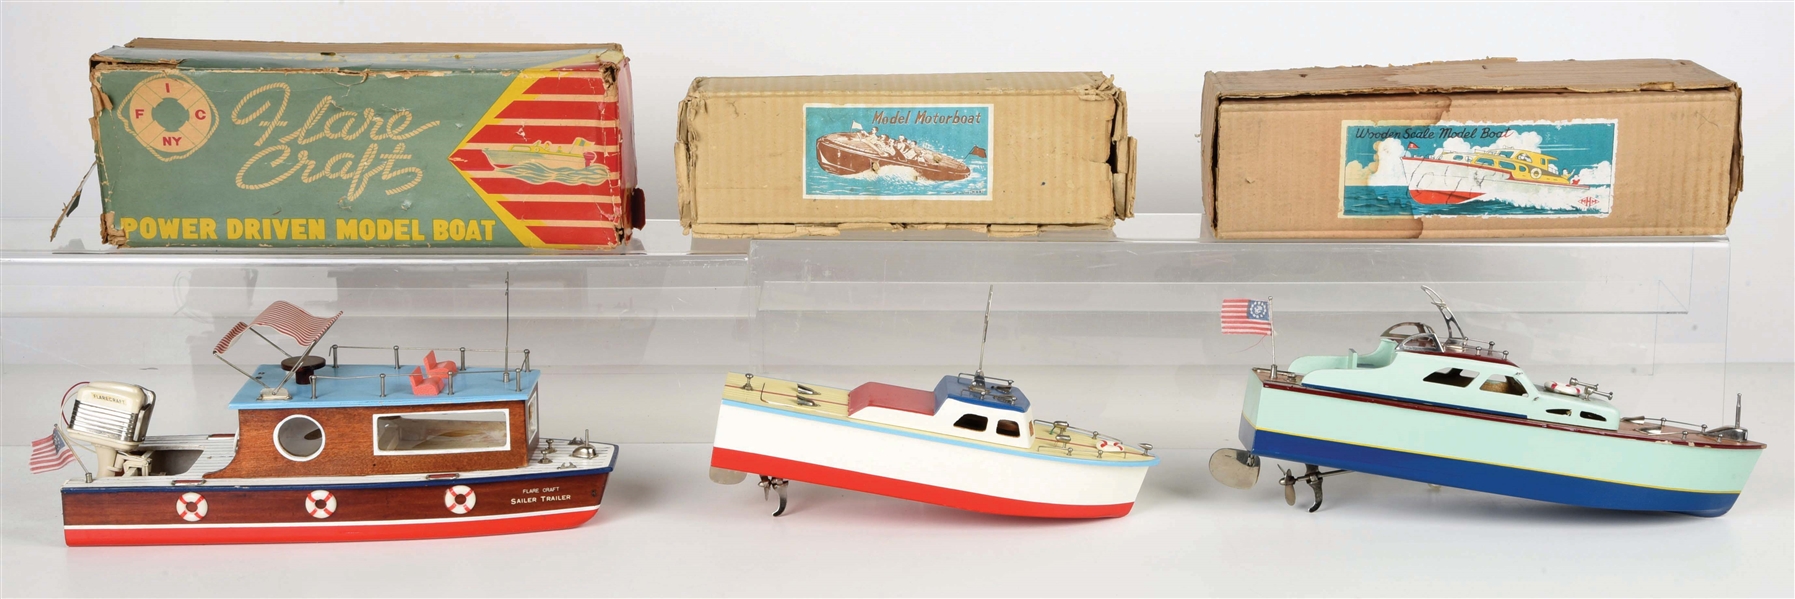 LOT OF 3: JAPANESE BATTERY-OPERATED WOODEN BOAT MODELS IN ORIGINAL BOXES.